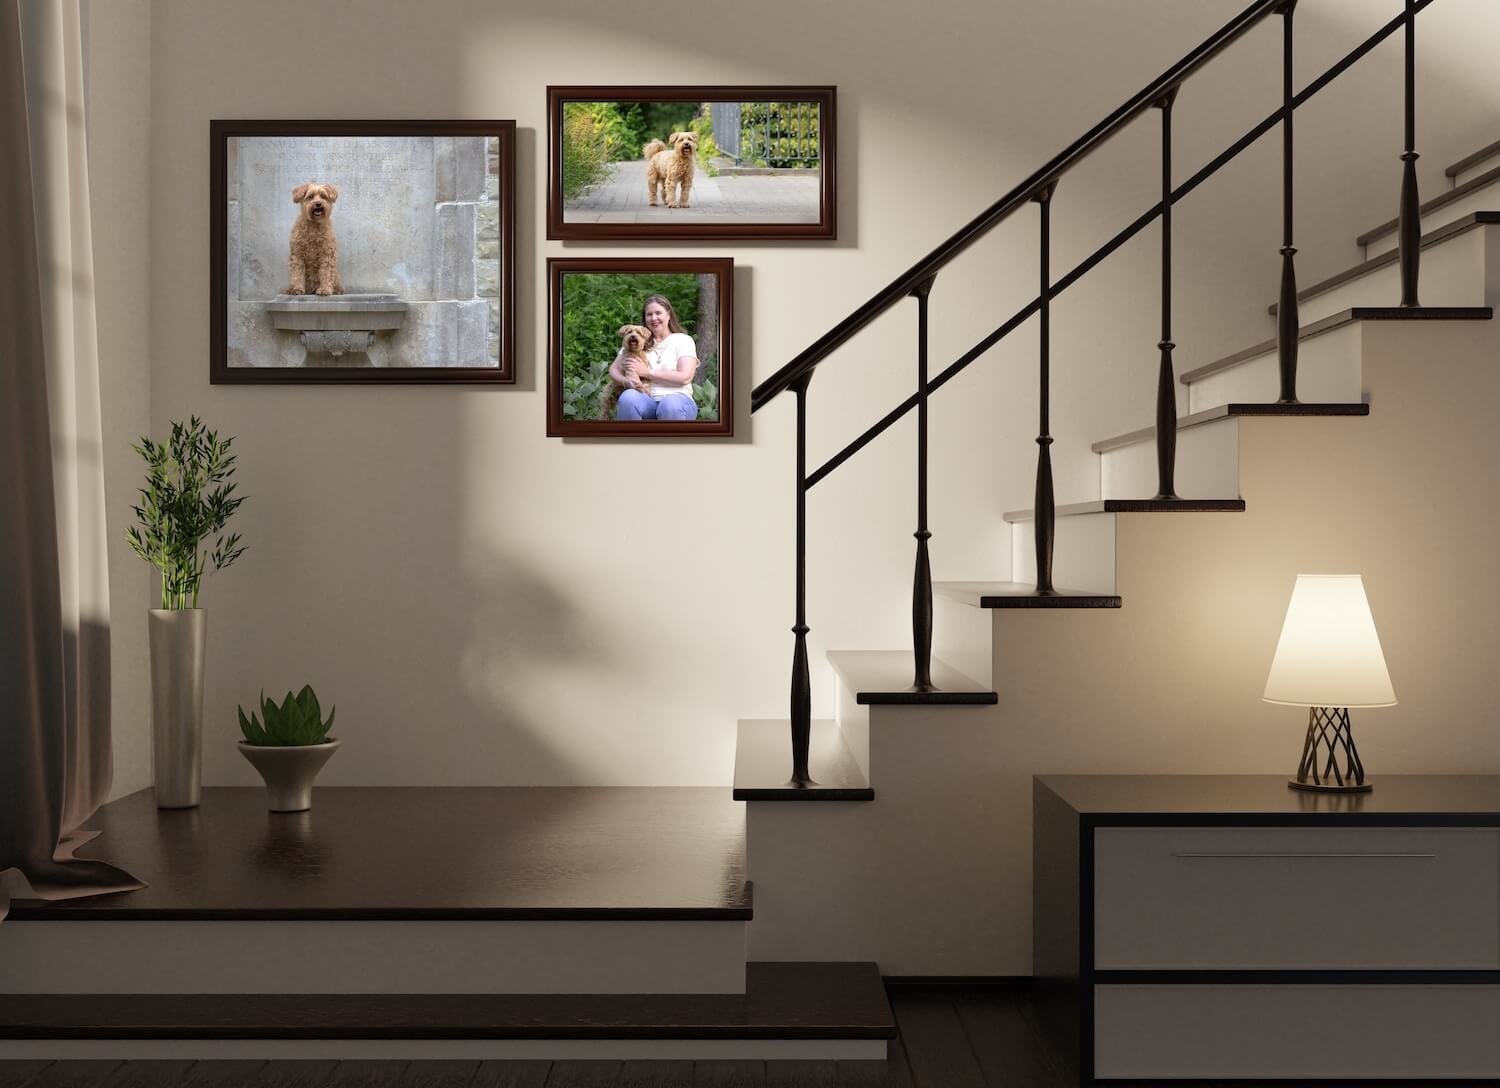 DECORATE AN EMPY STAIRCASE WALL WITH YOUR FAVOURITE IMAGES